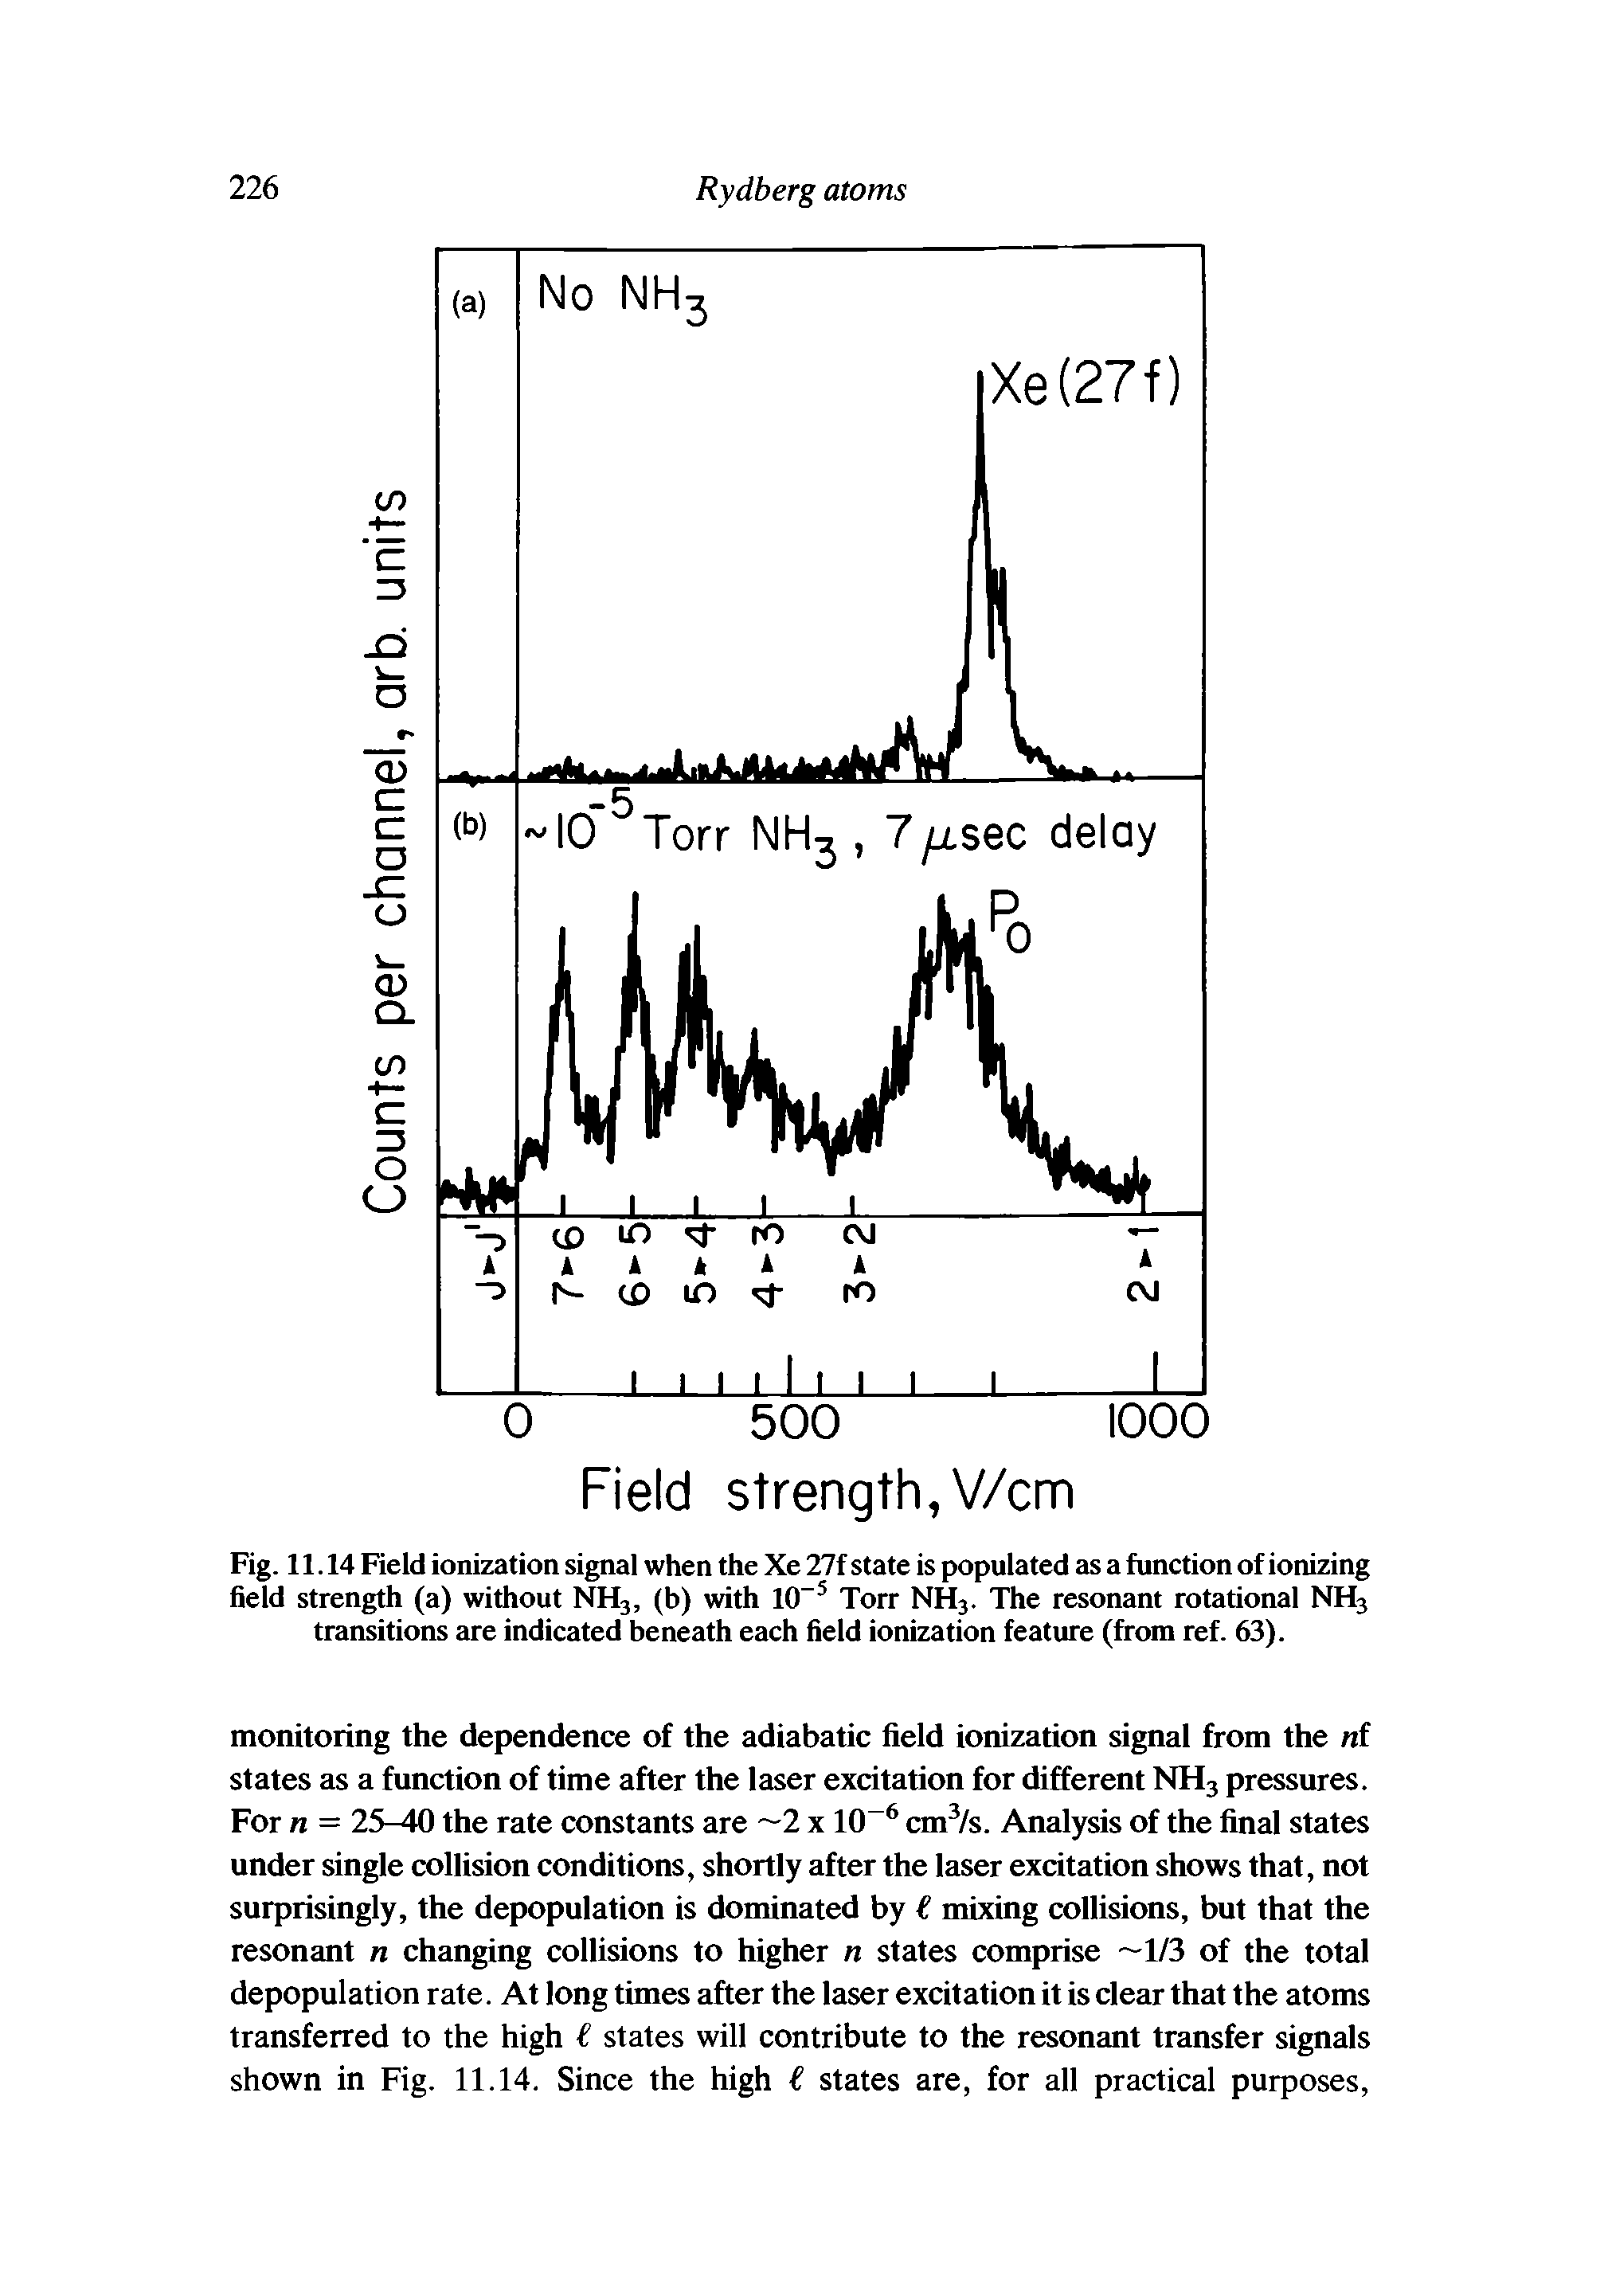 Fig. 11.14 Field ionization signal when the Xe 27f state is populated as a function of ionizing field strength (a) without NH3, (b) with 10 5 Torr NH3. The resonant rotational NH3 transitions are indicated beneath each field ionization feature (from ref. 63).